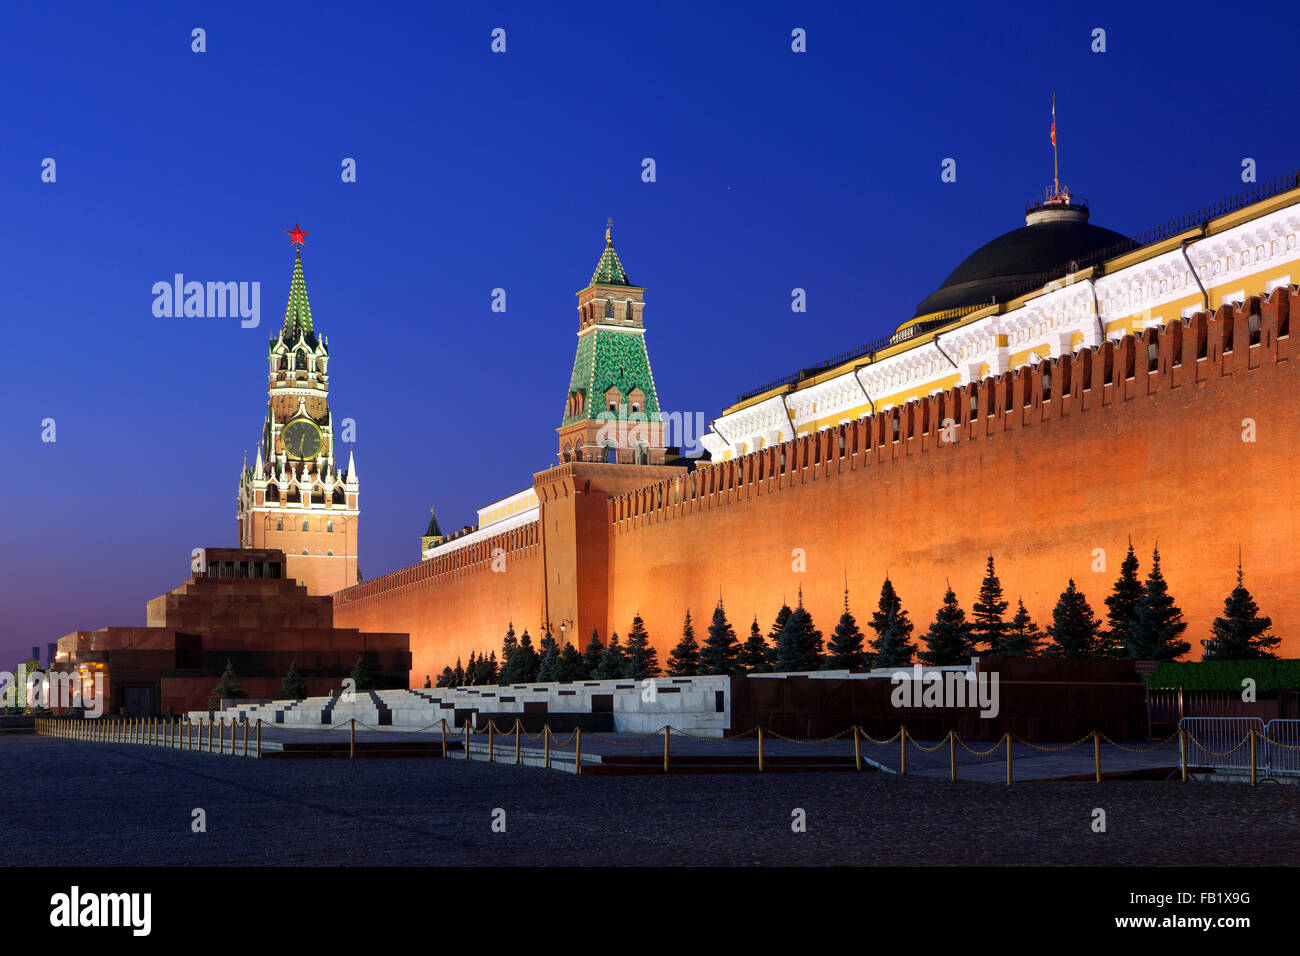 The Savior's Tower, Senate, Kremlin Wall Necropolis and Lenin's Mausoleum at dawn in Moscow, Russia Stock Photo